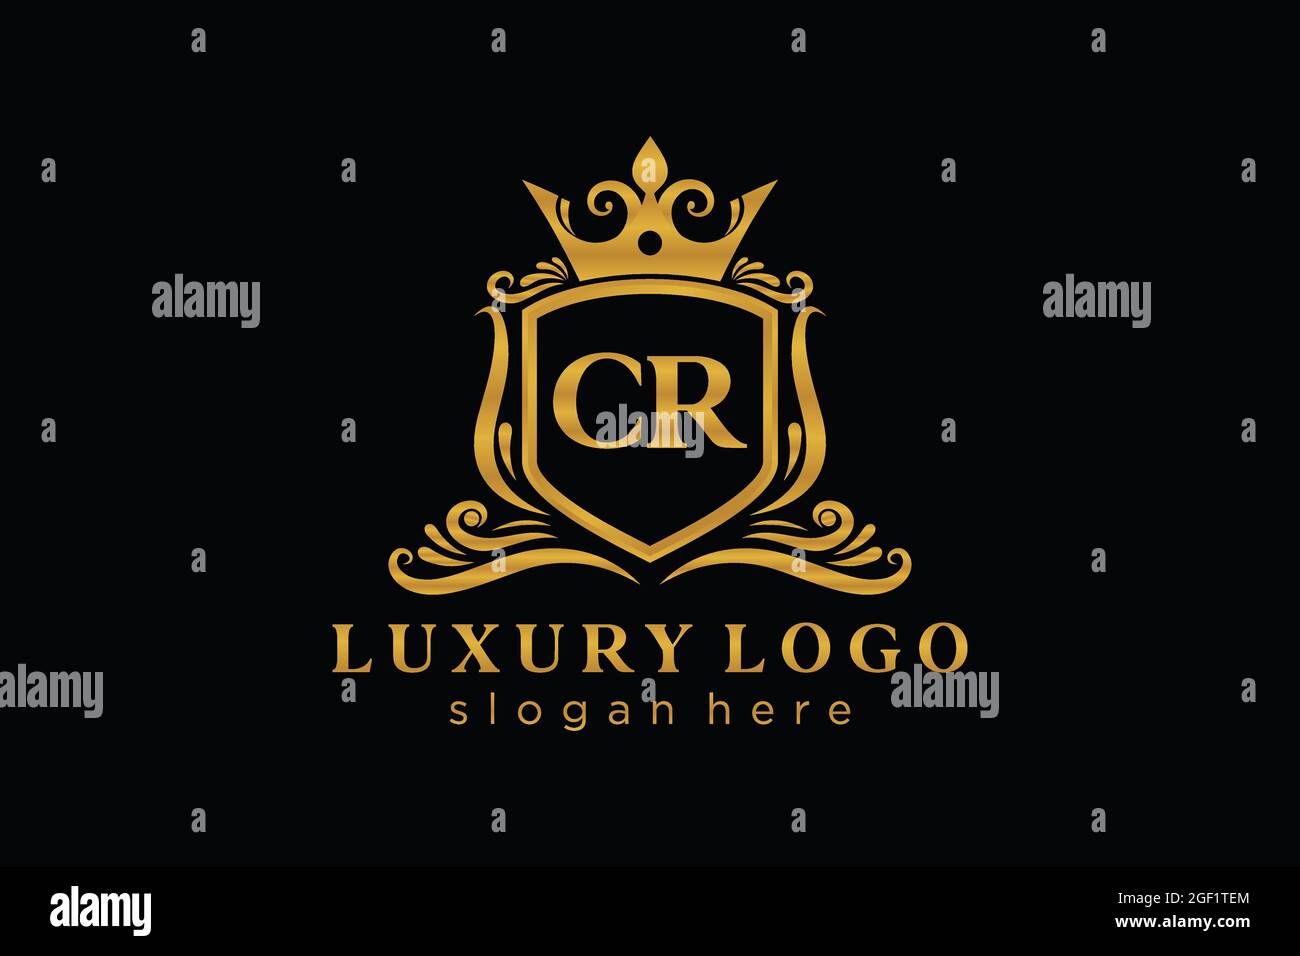 CR Letter Royal Luxury Logo template in vector art for Restaurant, Royalty, Boutique, Cafe, Hotel, Heraldic, Jewelry, Fashion and other vector illustr Stock Vector